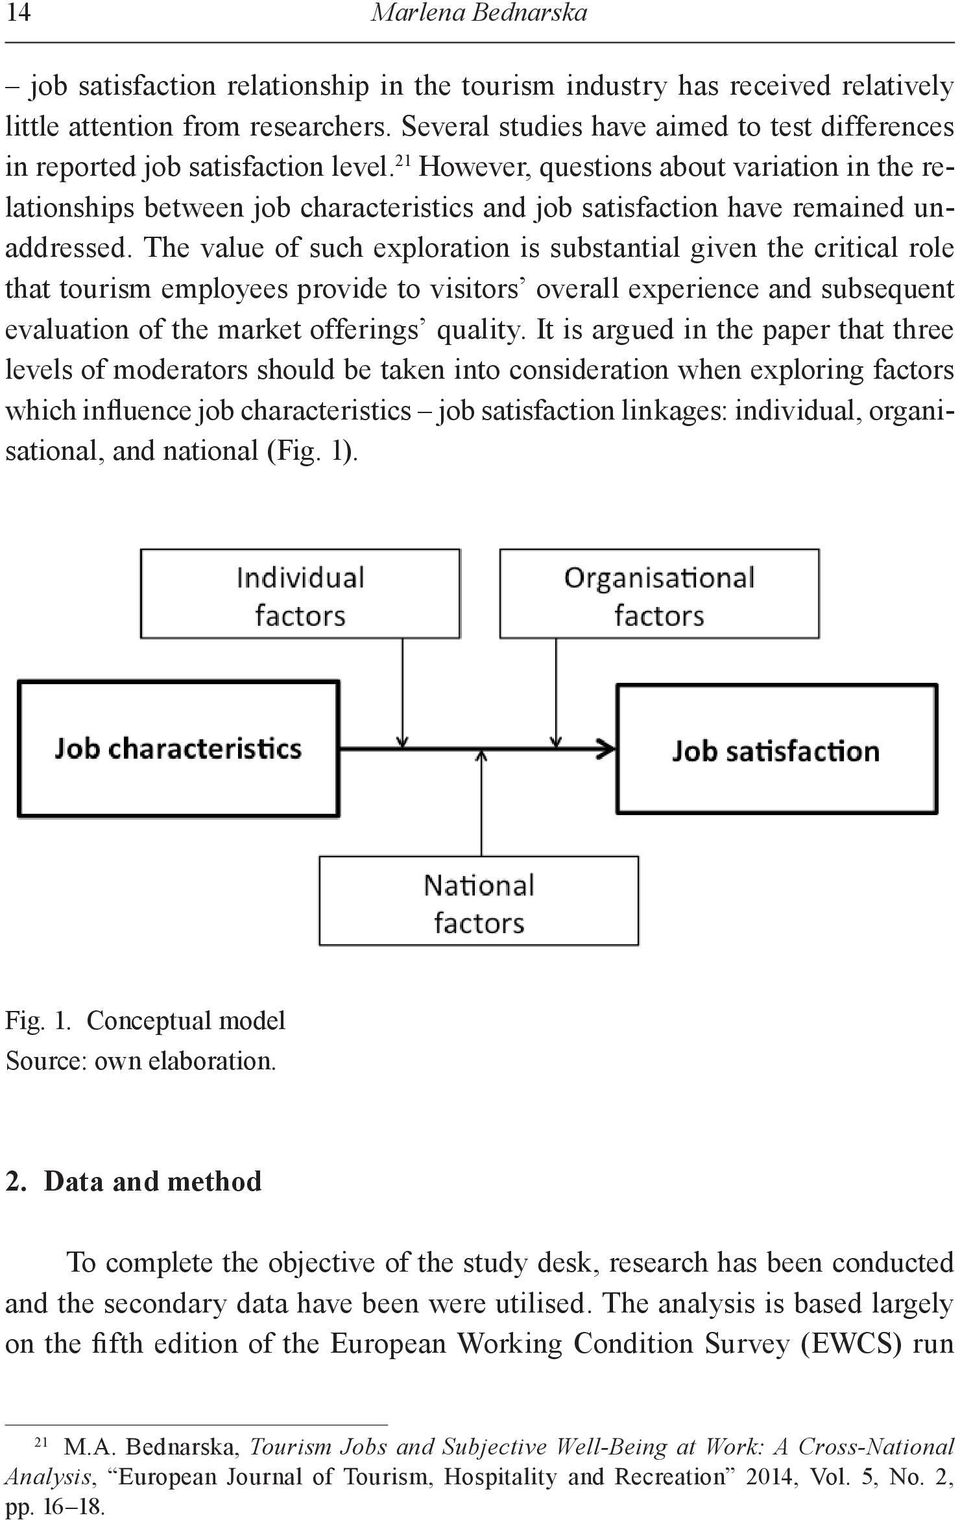 21 However, questions about variation in the relationships between job characteristics and job satisfaction have remained unaddressed.